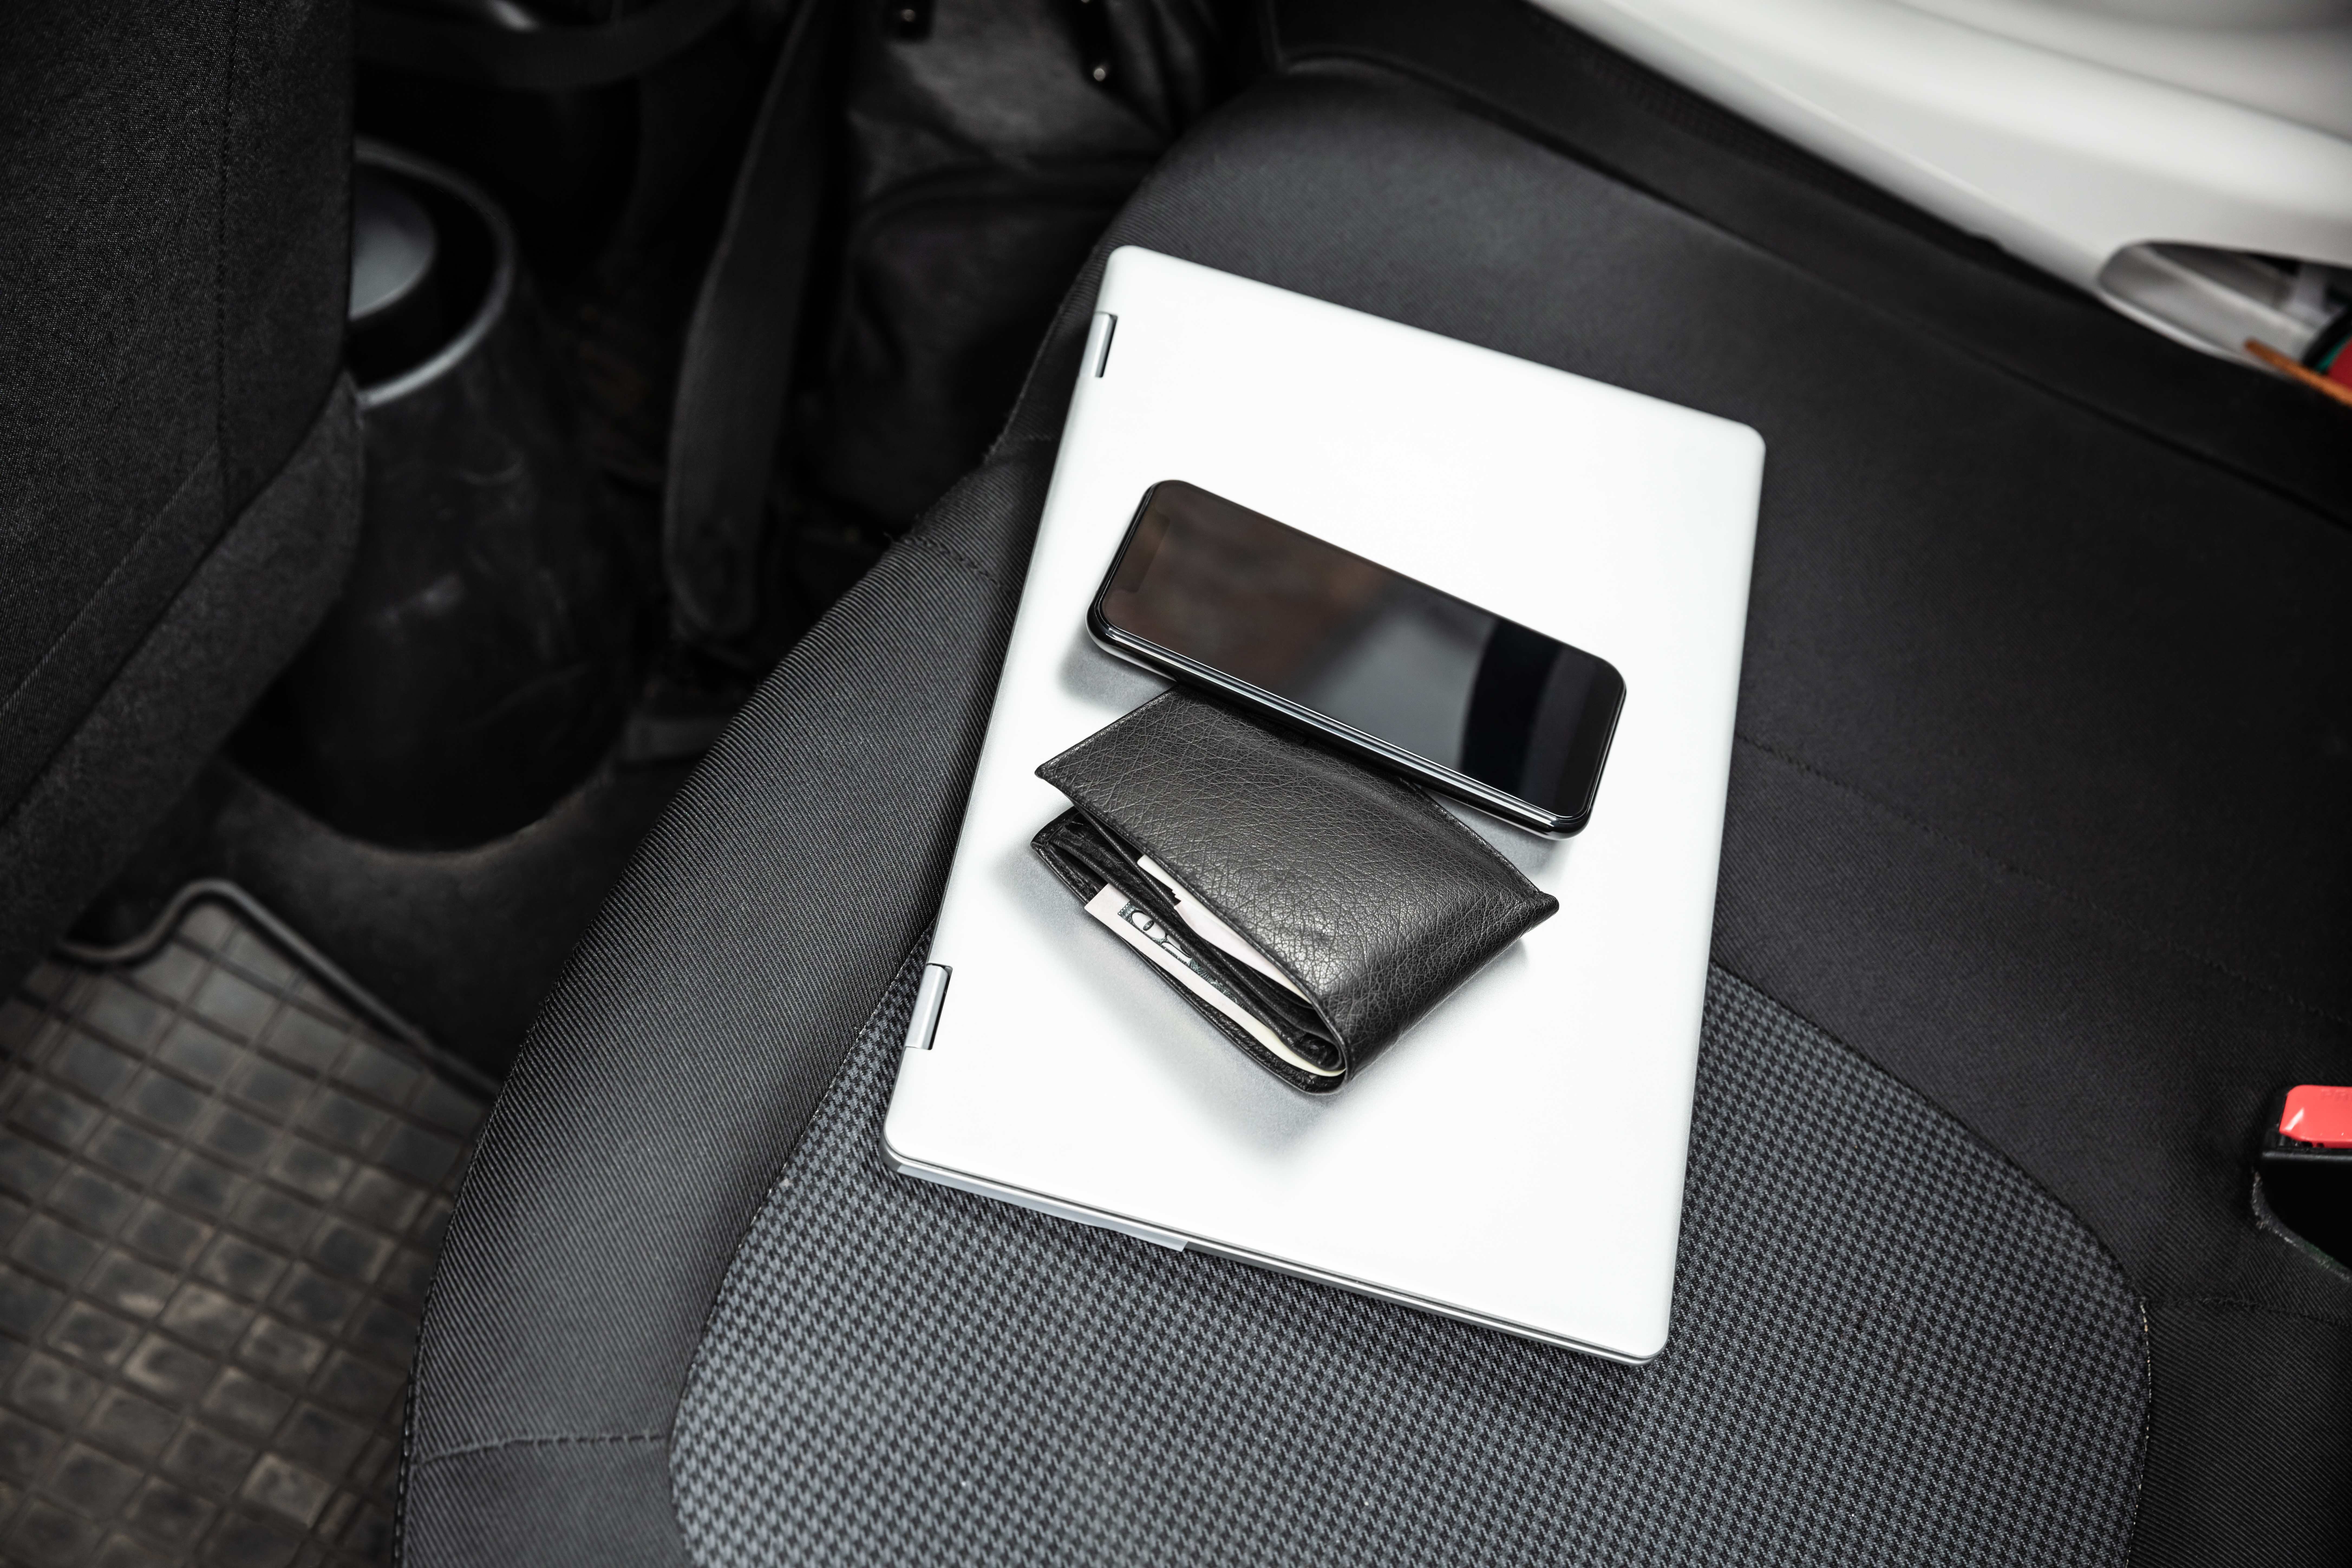 Personal belongings left on the back seat of a car | Source: Shutterstock